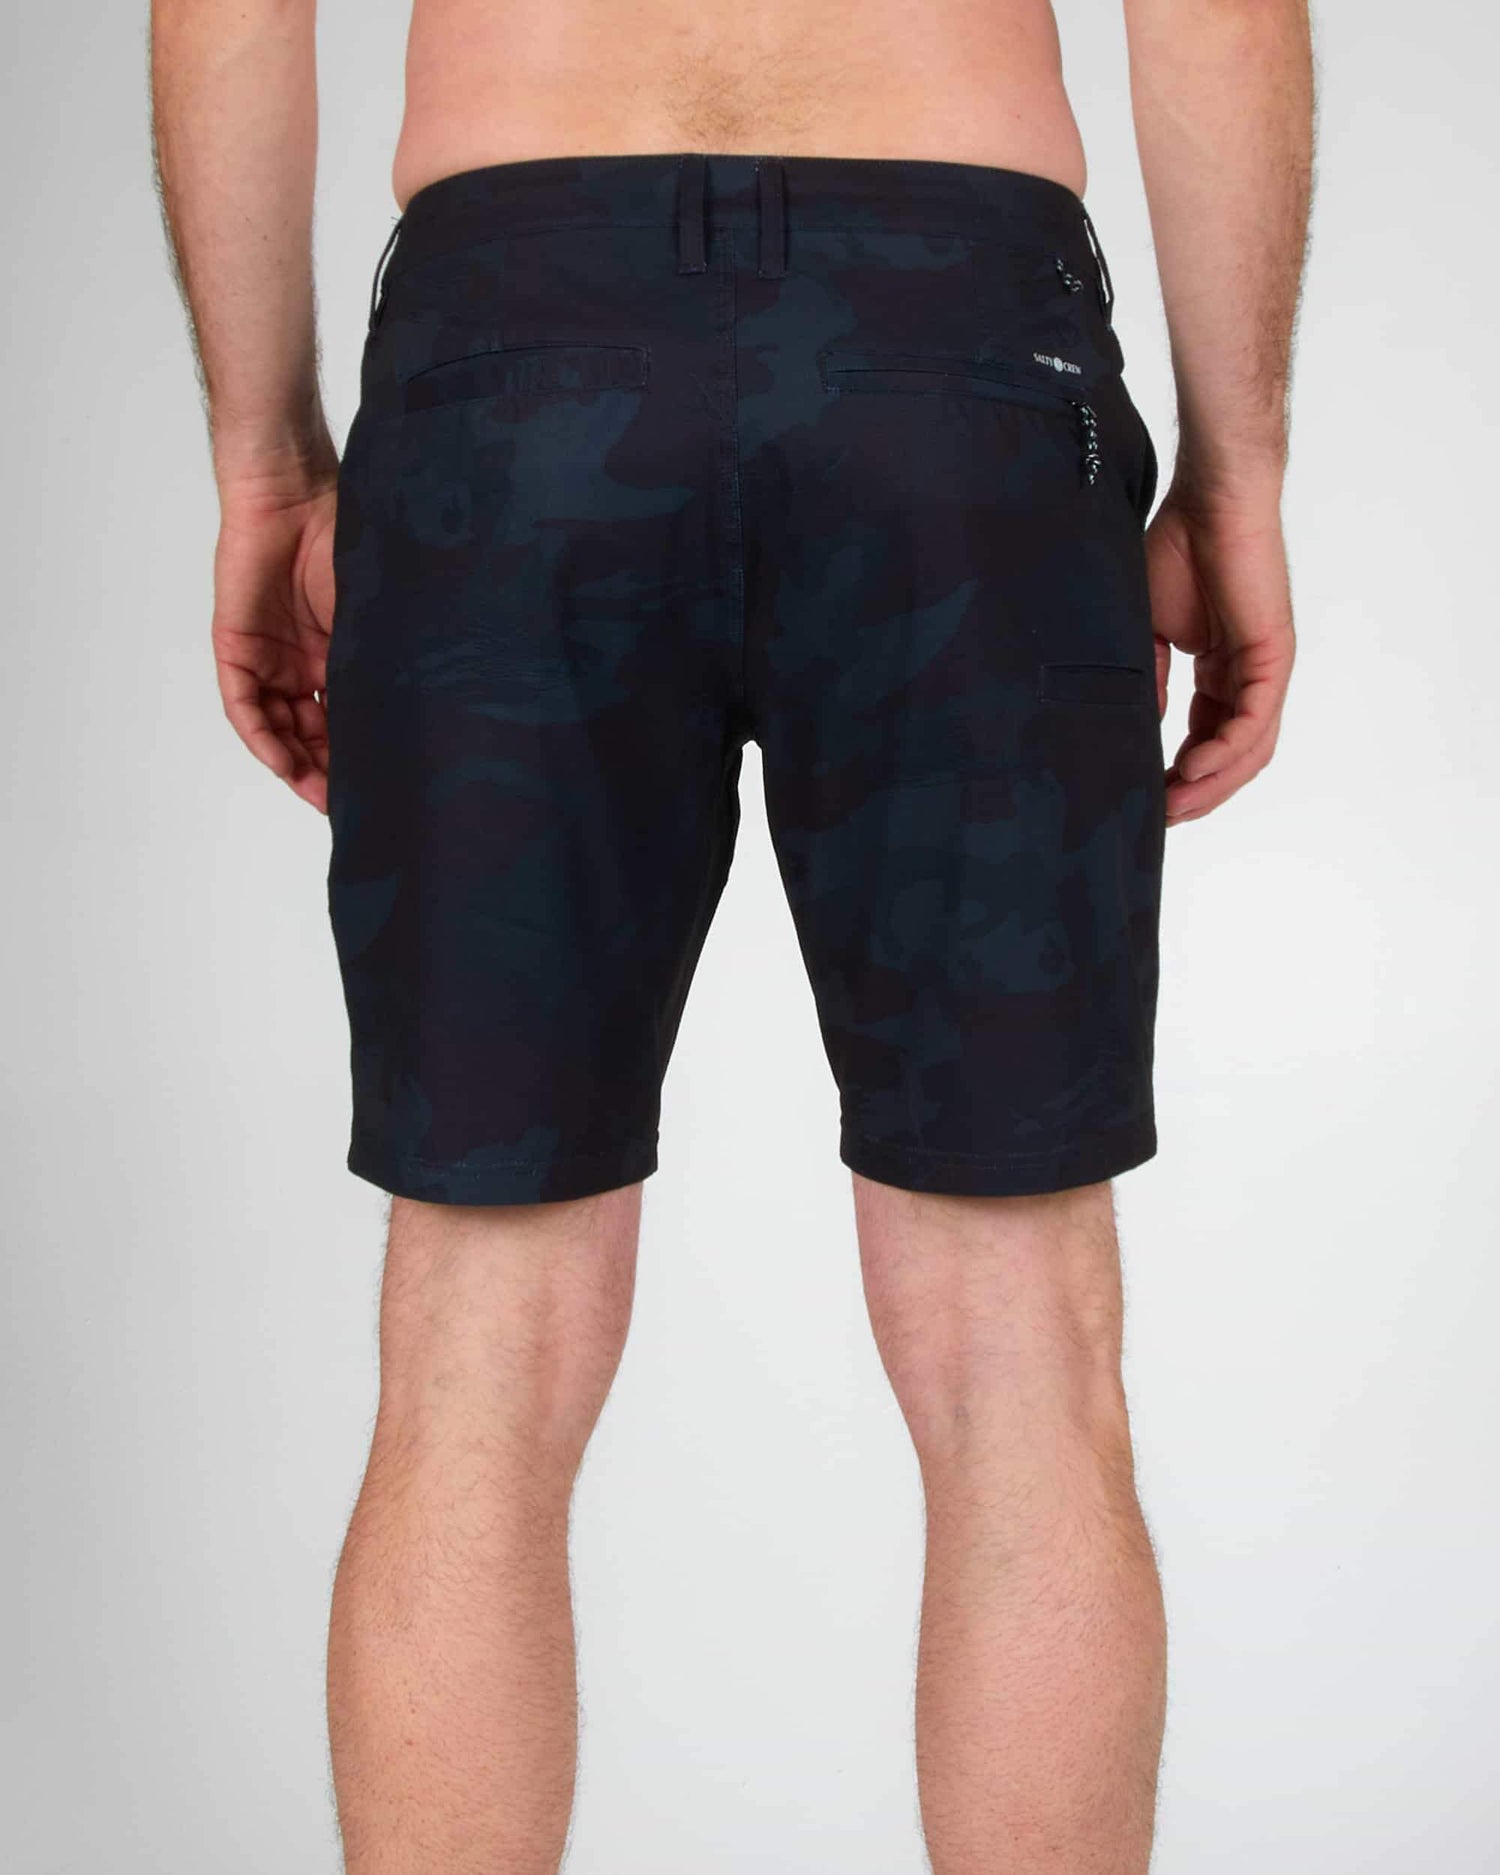 Salty crew SHORTS DRIFTER 2 PERFORATED - BLACK CAMO in BLACK CAMO